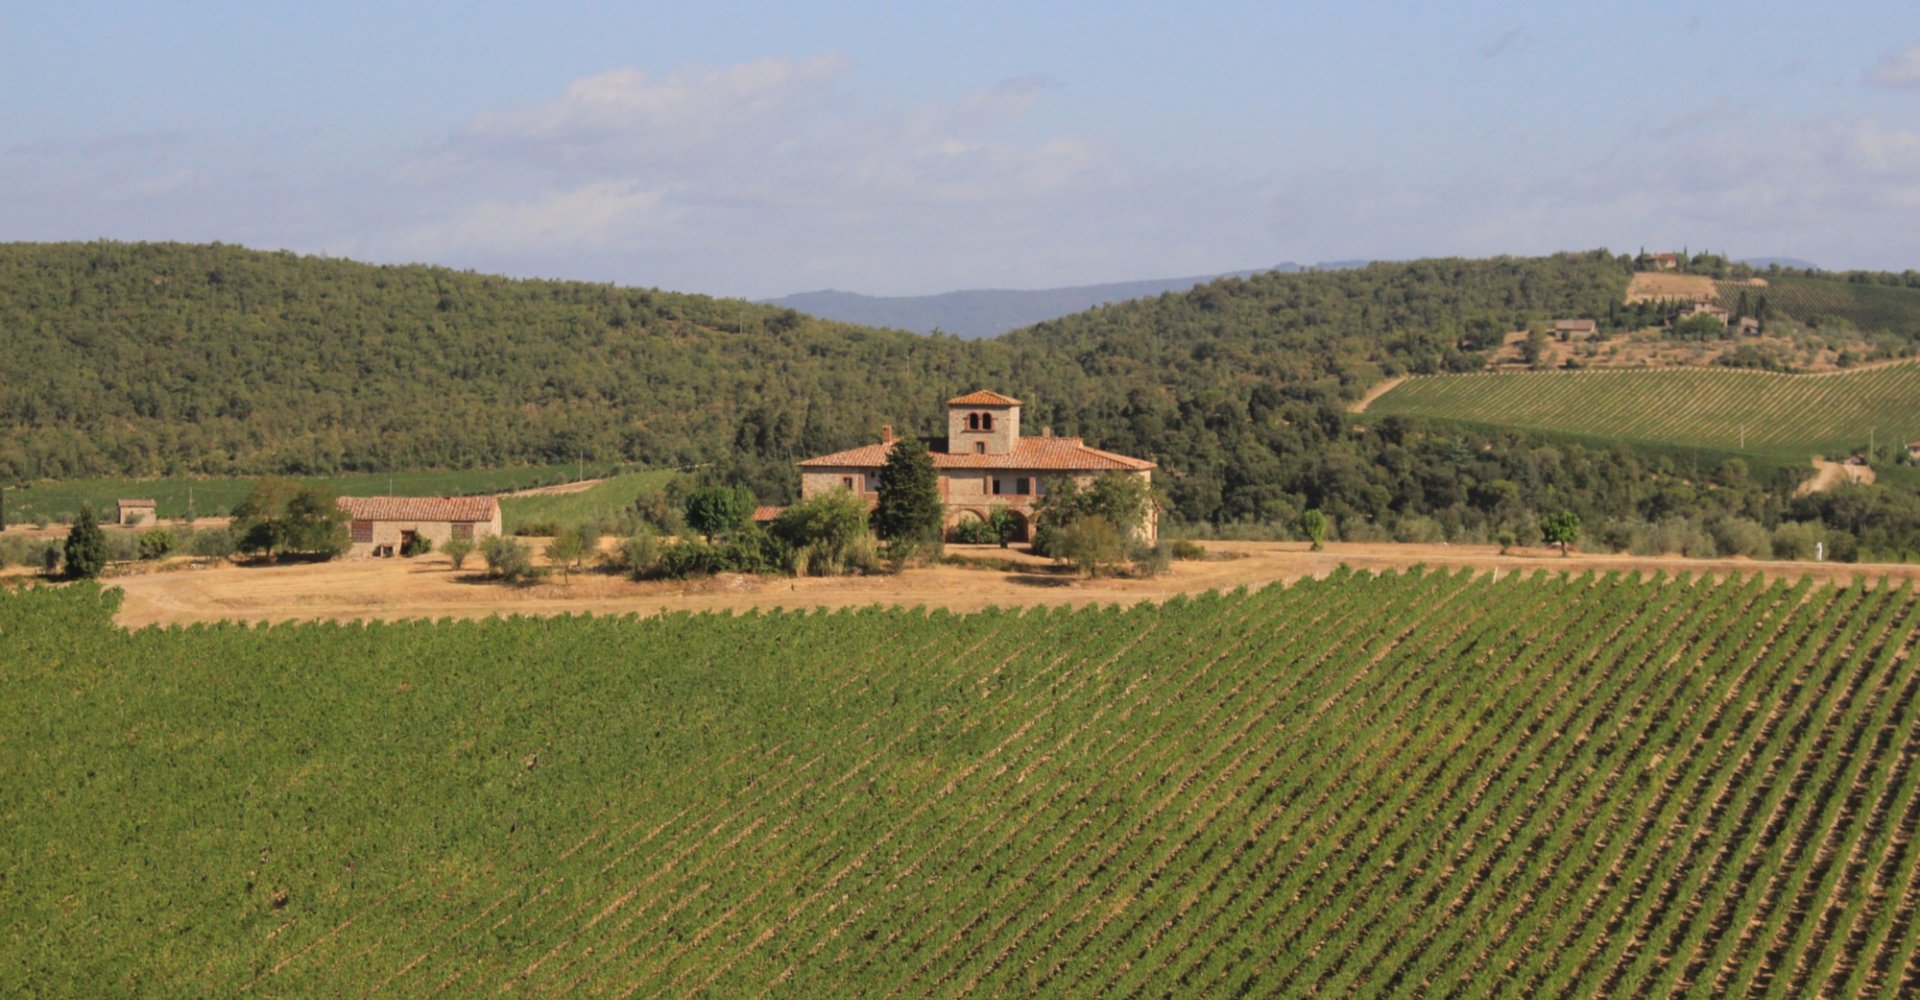 The house from Stealing Beauty in Gaiole in Chianti